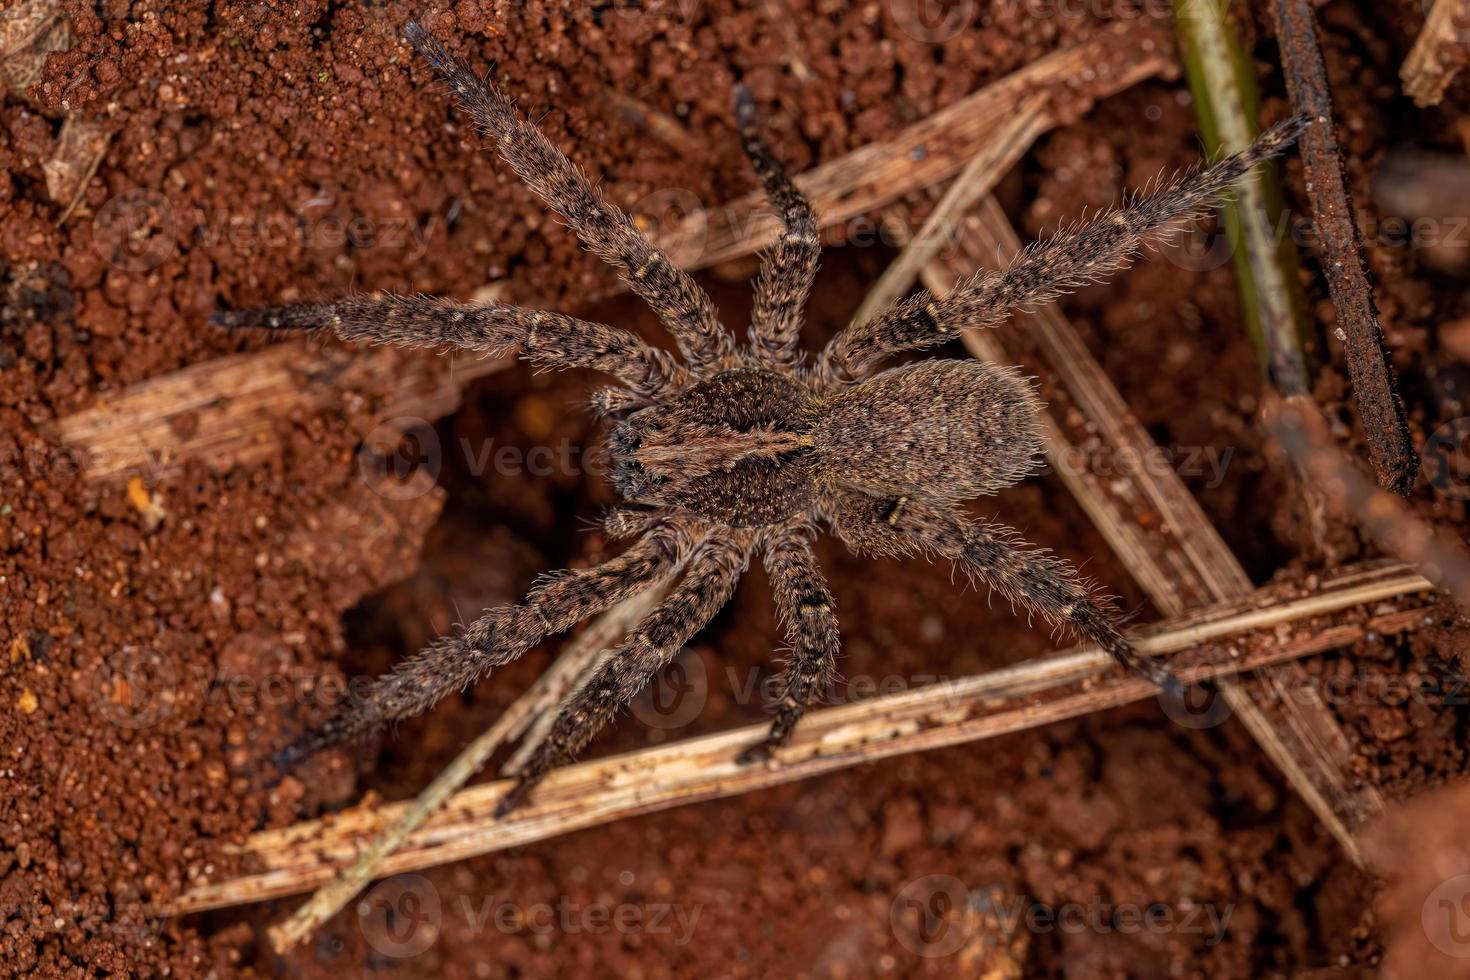 Adult Wandering Spider photo